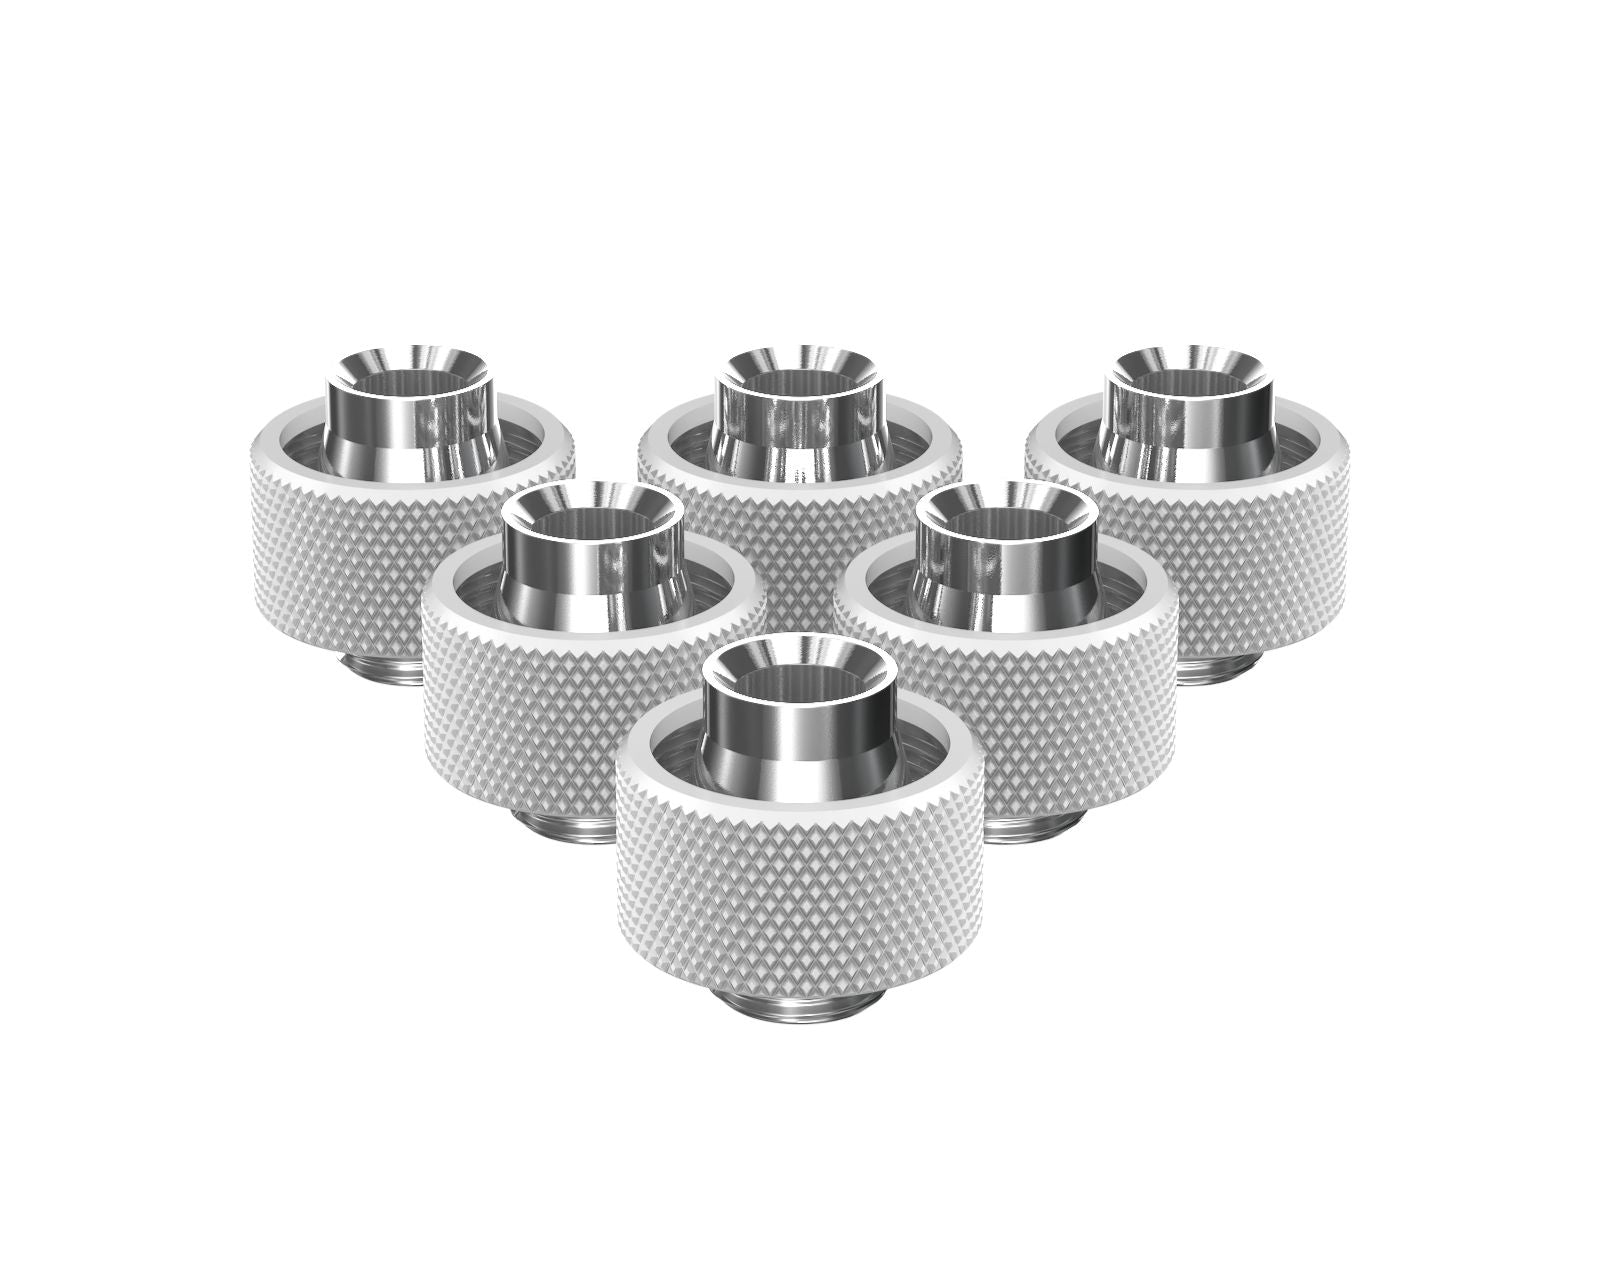 PrimoChill SecureFit SX - Premium Compression Fittings 6 Pack - For 1/2in ID x 3/4in OD Flexible Tubing (F-SFSX34-6) - Available in 20+ Colors, Custom Watercooling Loop Ready - Sky White